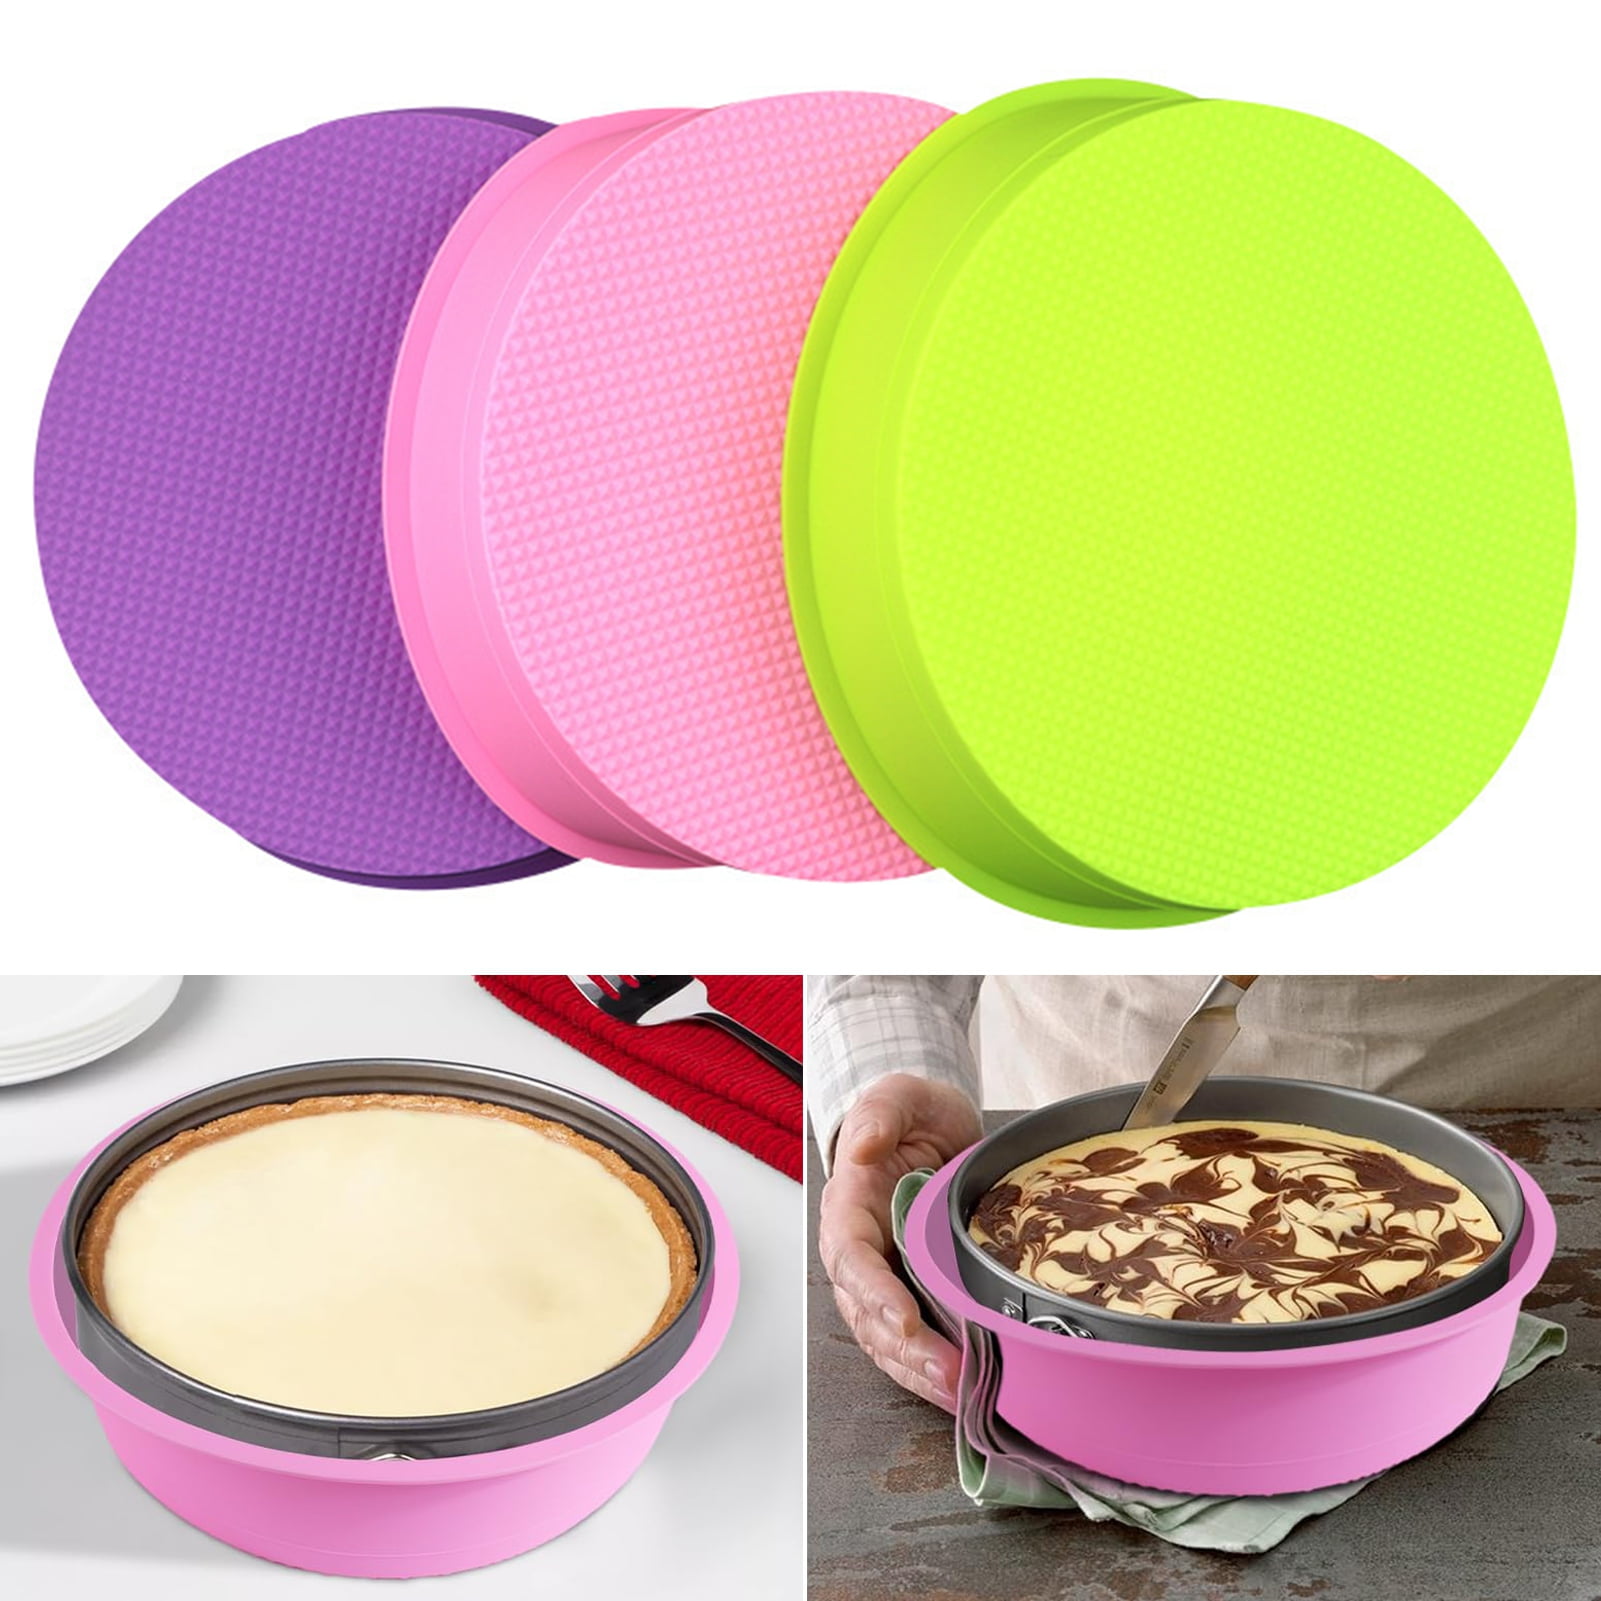 Honrane Water Bath Cheesecake Pan Round Silicone Cake Baking Tray Reusable  Non-sticky Cheese Cake Pan Protector for Diy Baking Desserts Mousse Cakes